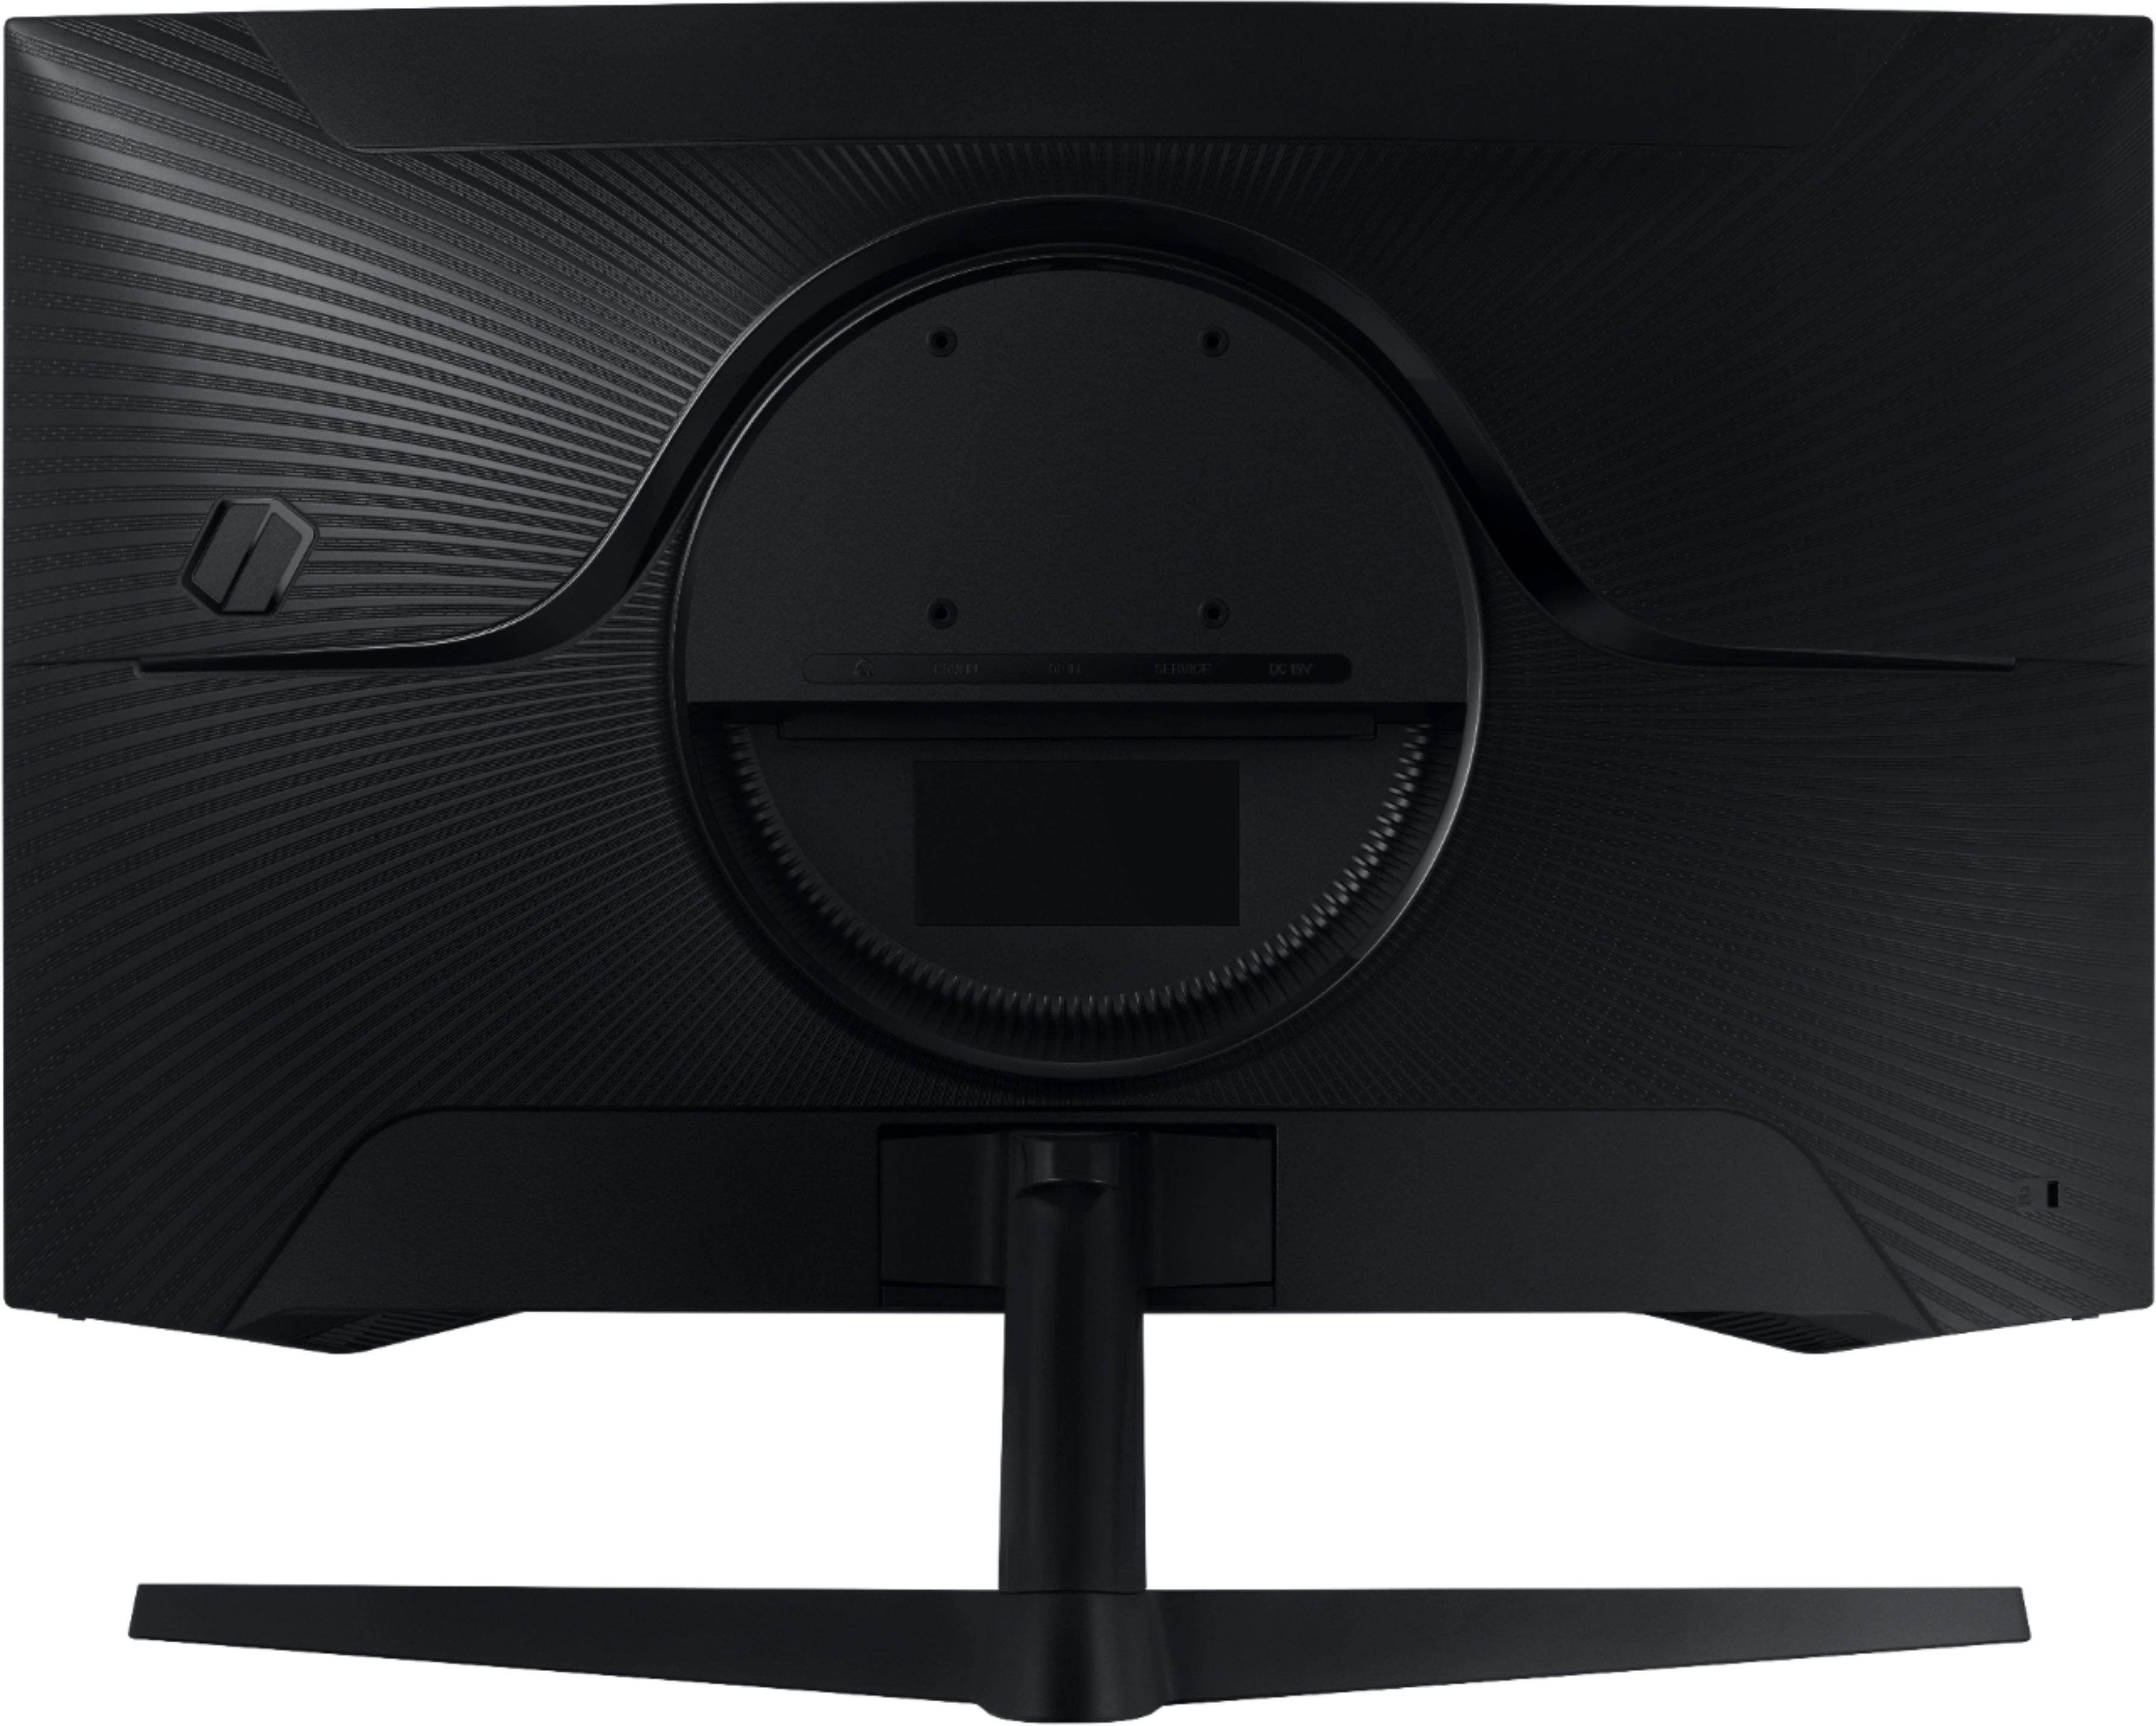 Back View: Samsung - Geek Squad Certified Refurbished Odyssey G57 Series 32" LED Curved QHD FreeSync Premium Monitor with HDR - Black